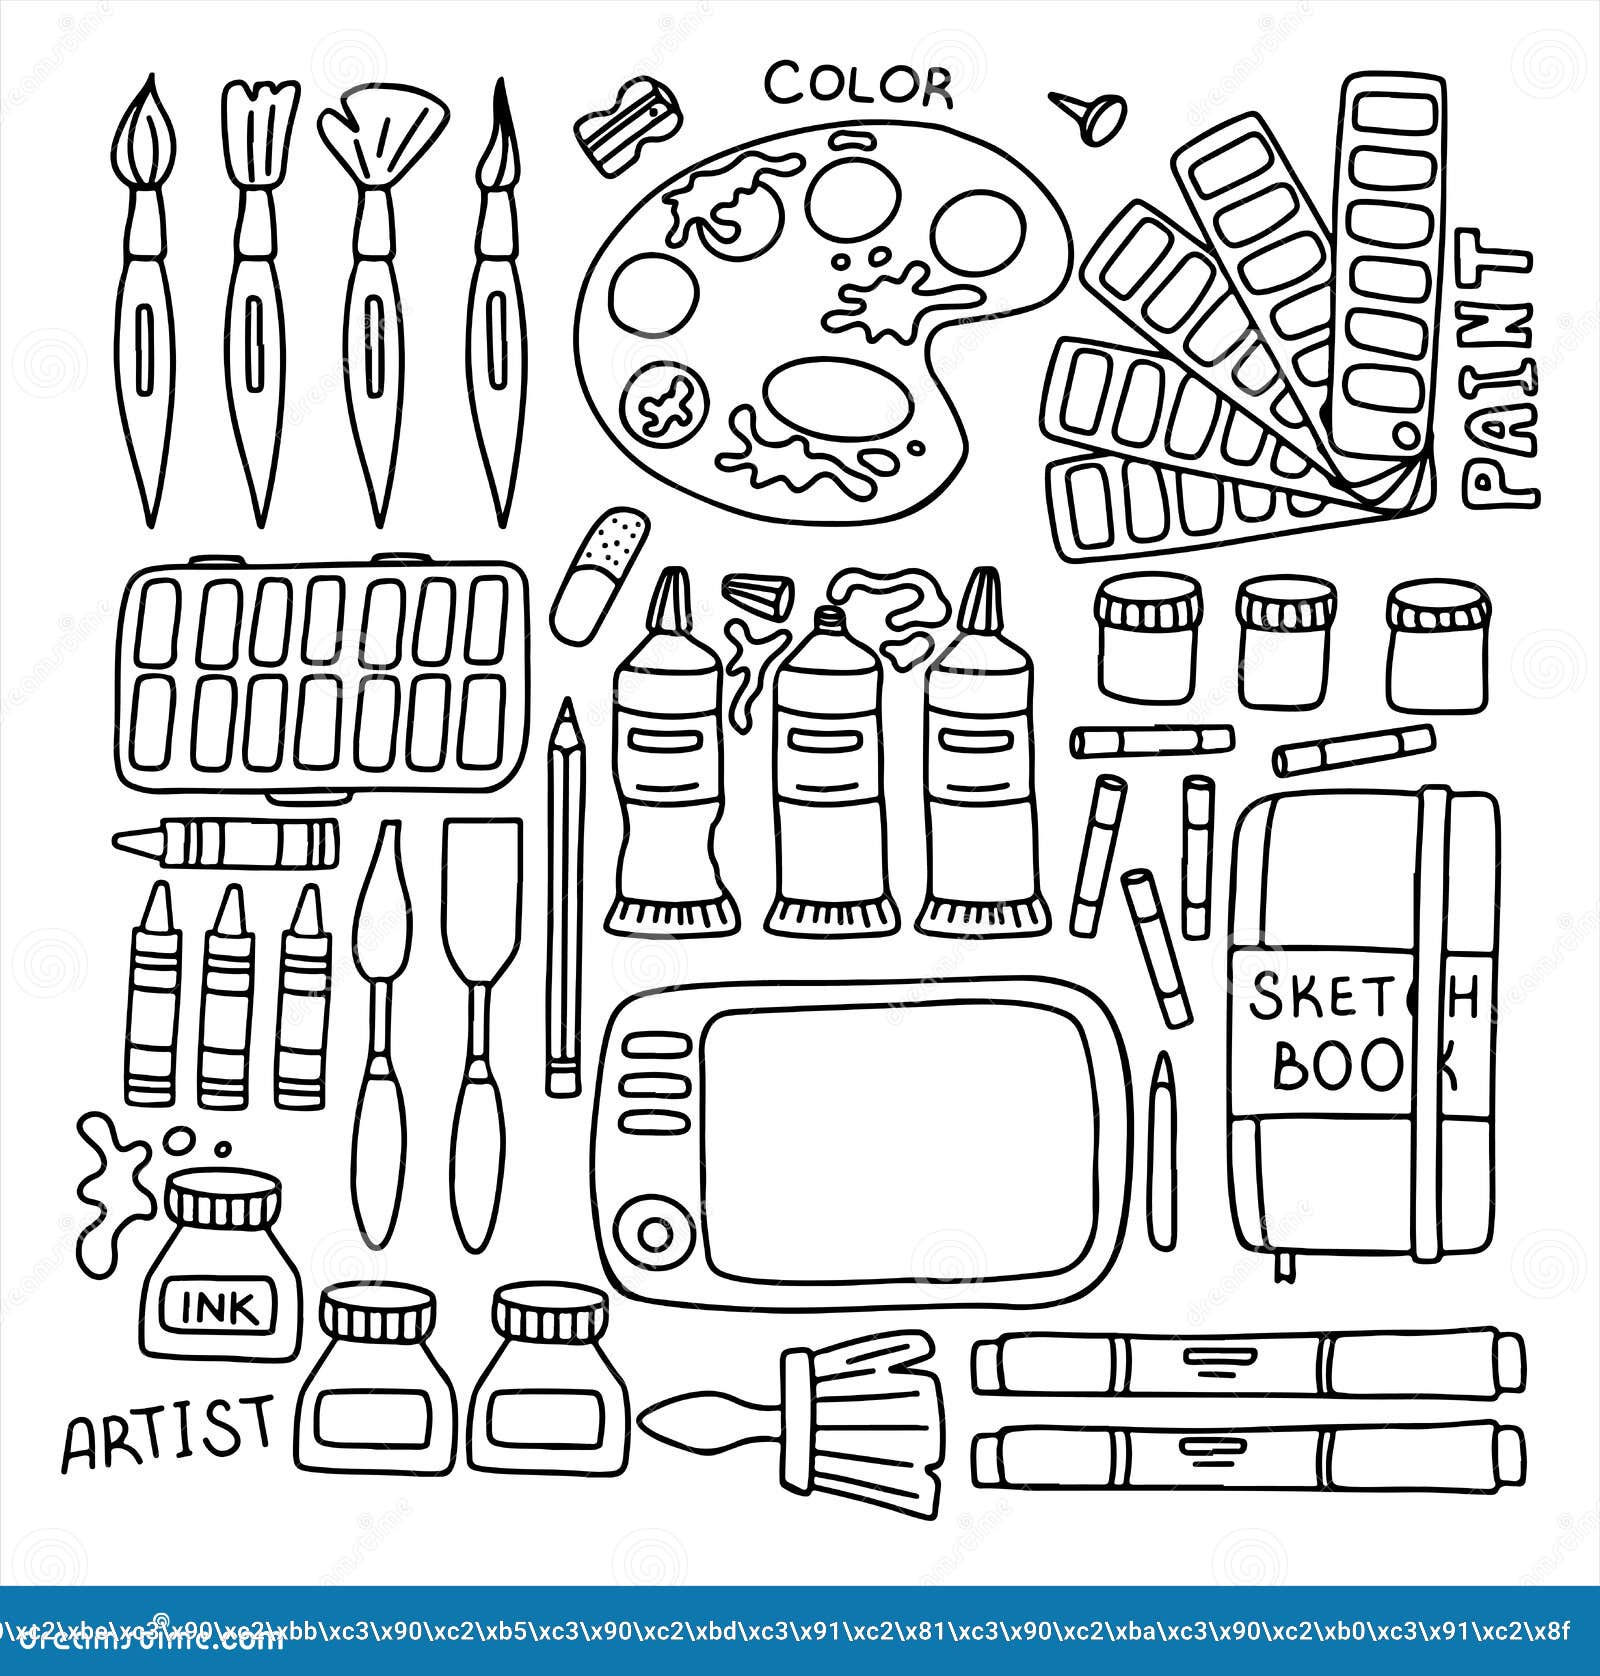 https://thumbs.dreamstime.com/z/vector-art-tools-sketch-set-hand-drawn-artist-s-supplies-doodle-graphic-tablet-markers-paints-background-240883554.jpg